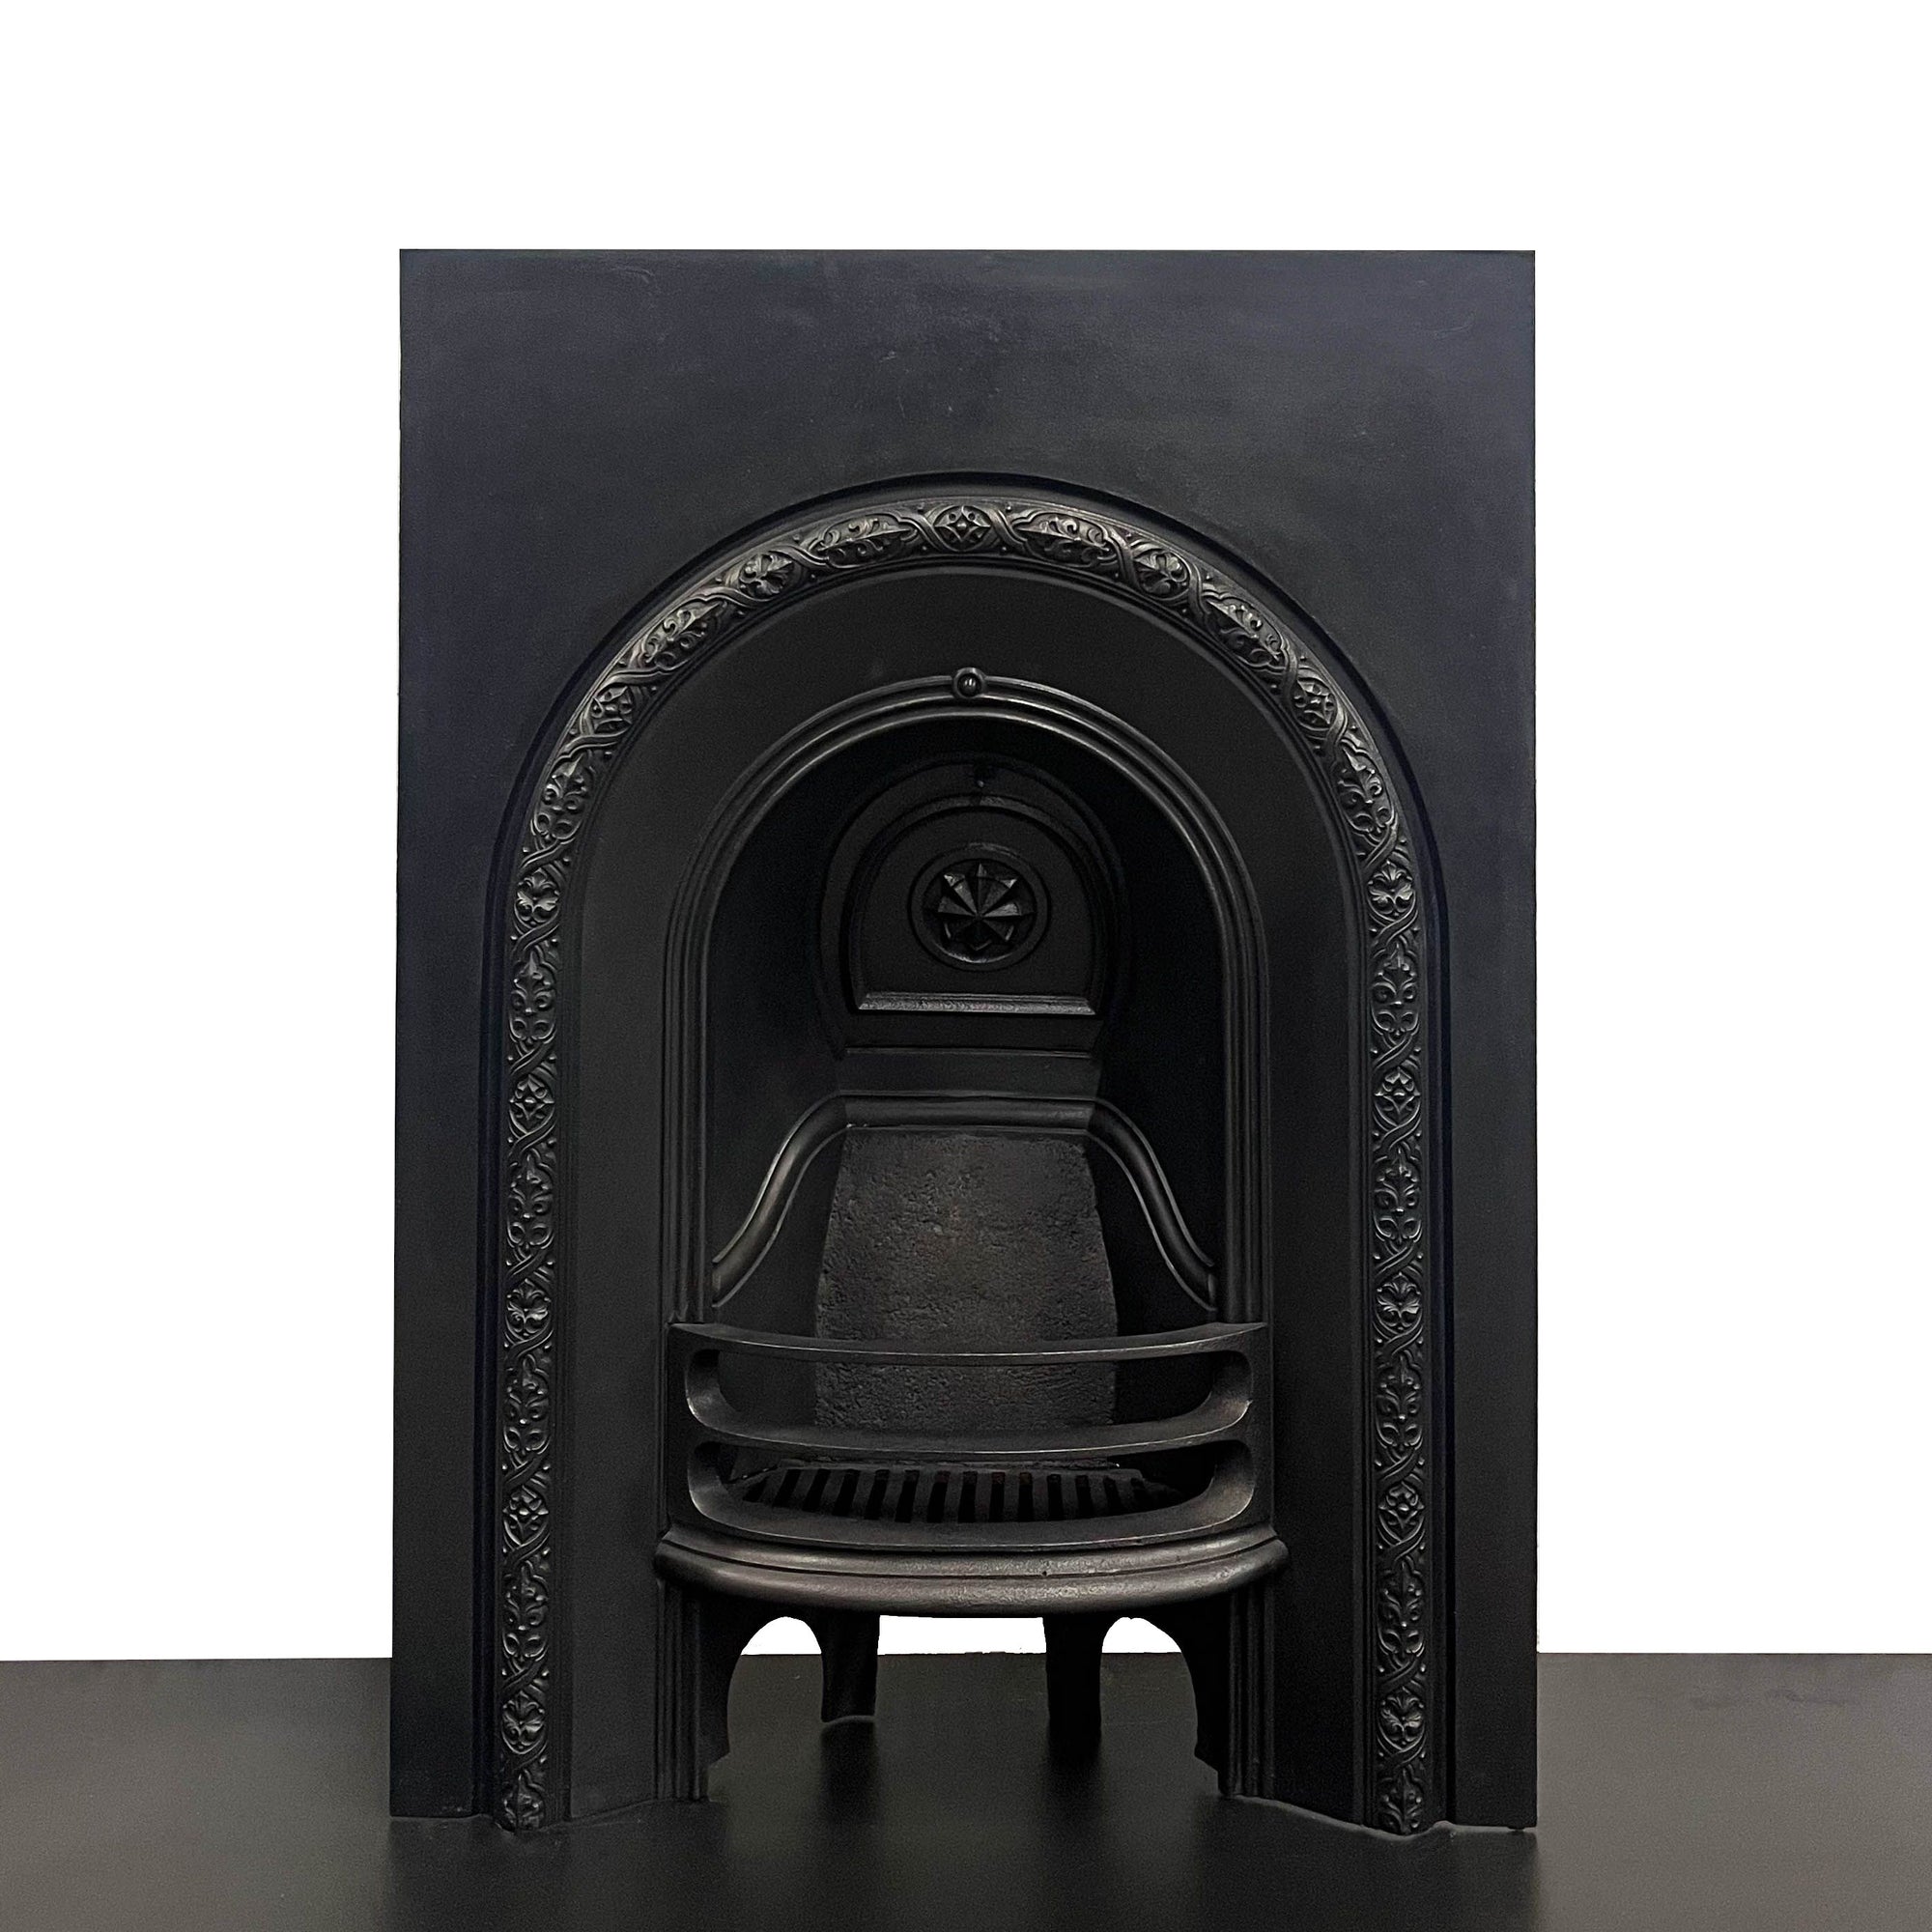 Antique Victorian Cast Iron Arched Fireplace Insert | The Architectural Forum